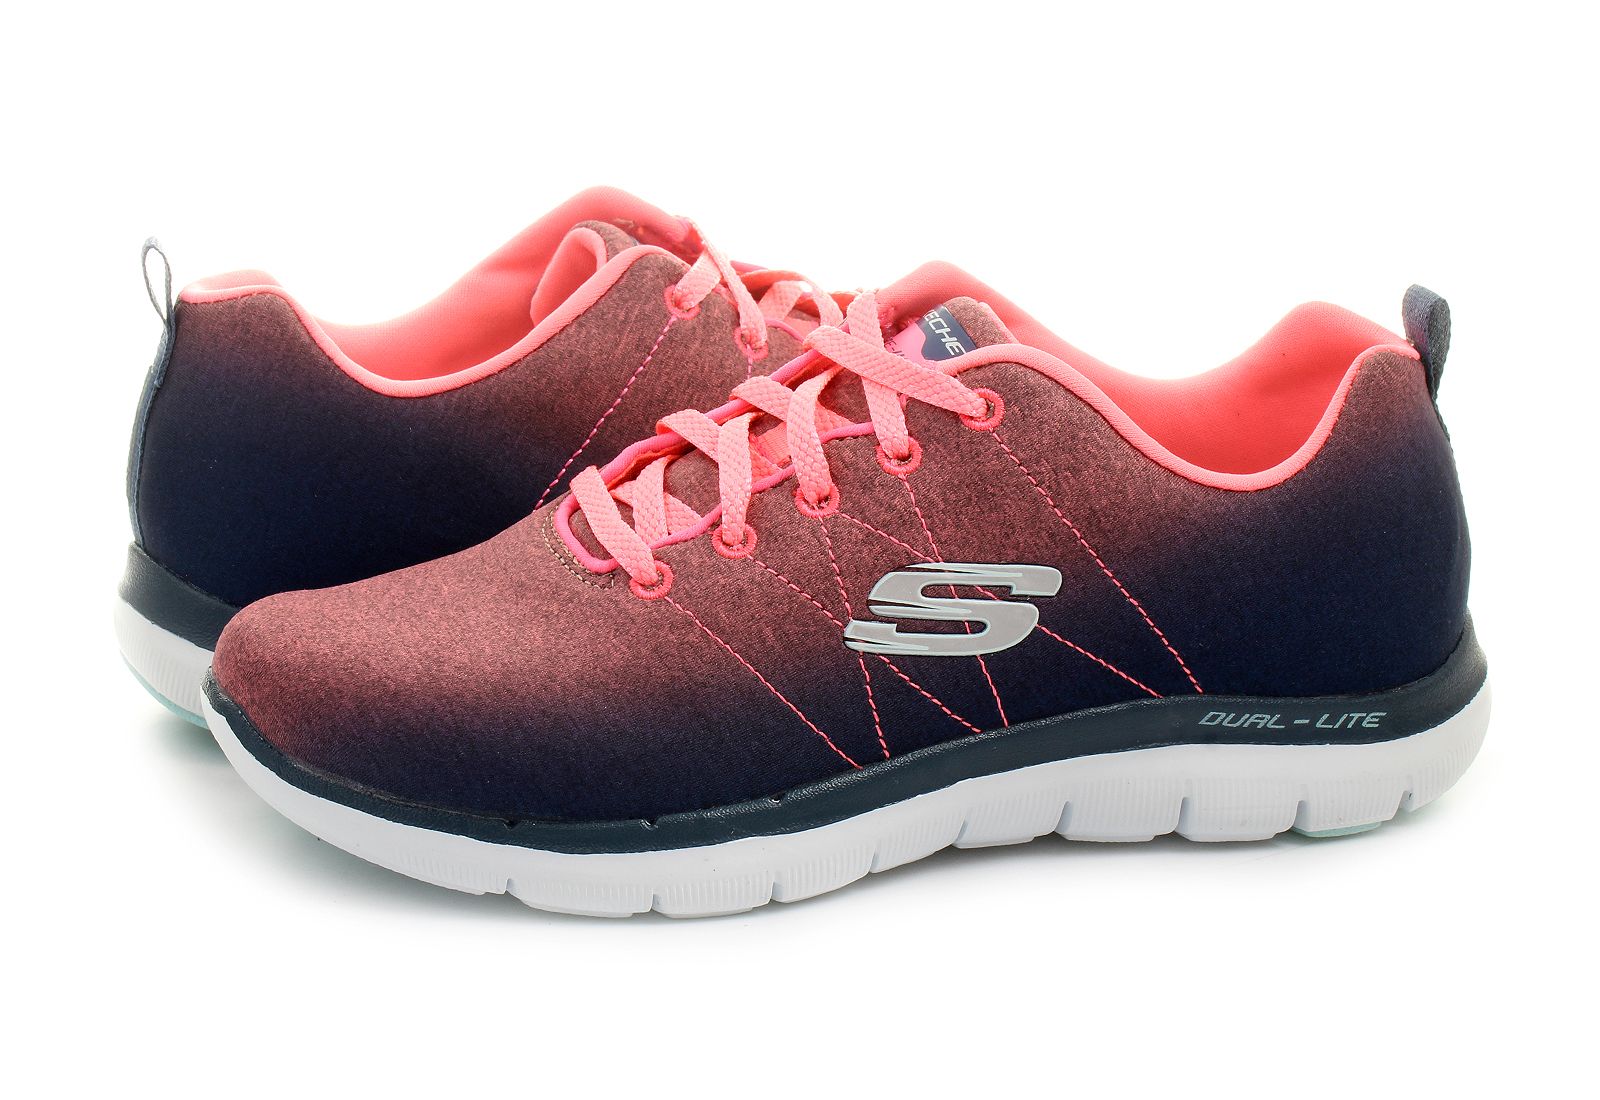 Skechers Clearance, SAVE